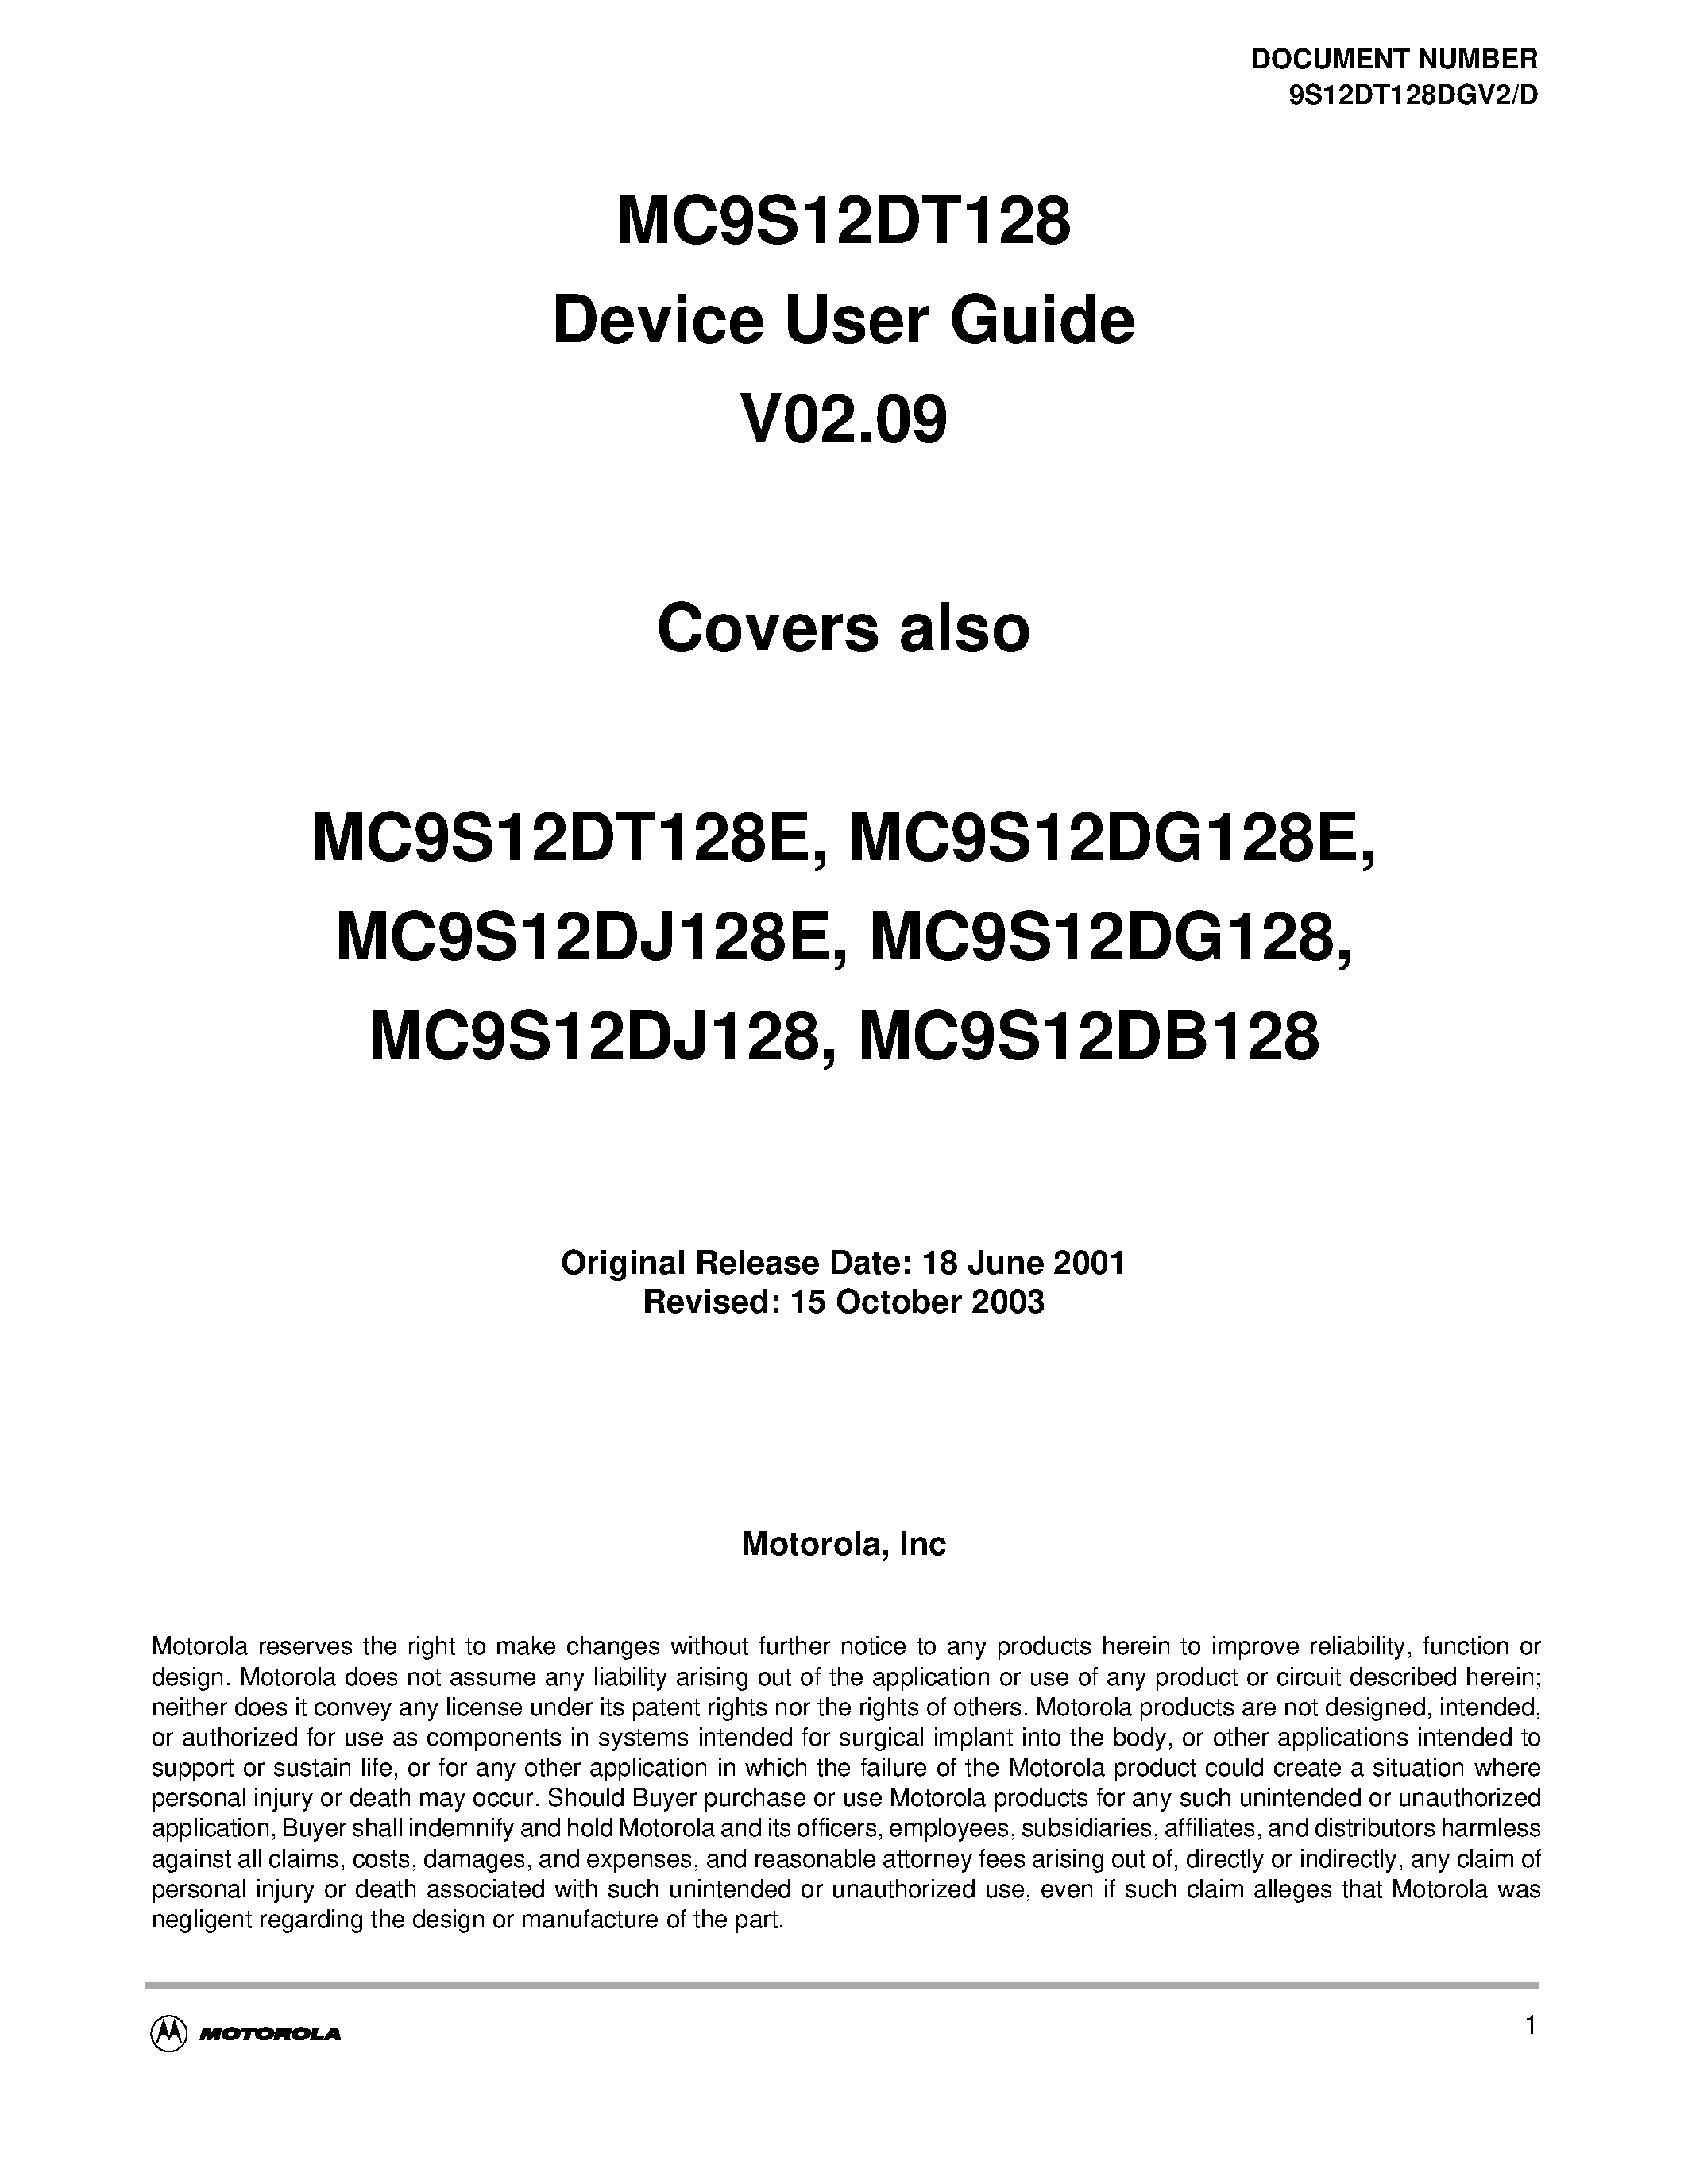 Datasheet SC515848 - MC9S12DT128 Device User Guide V02.09 page 1